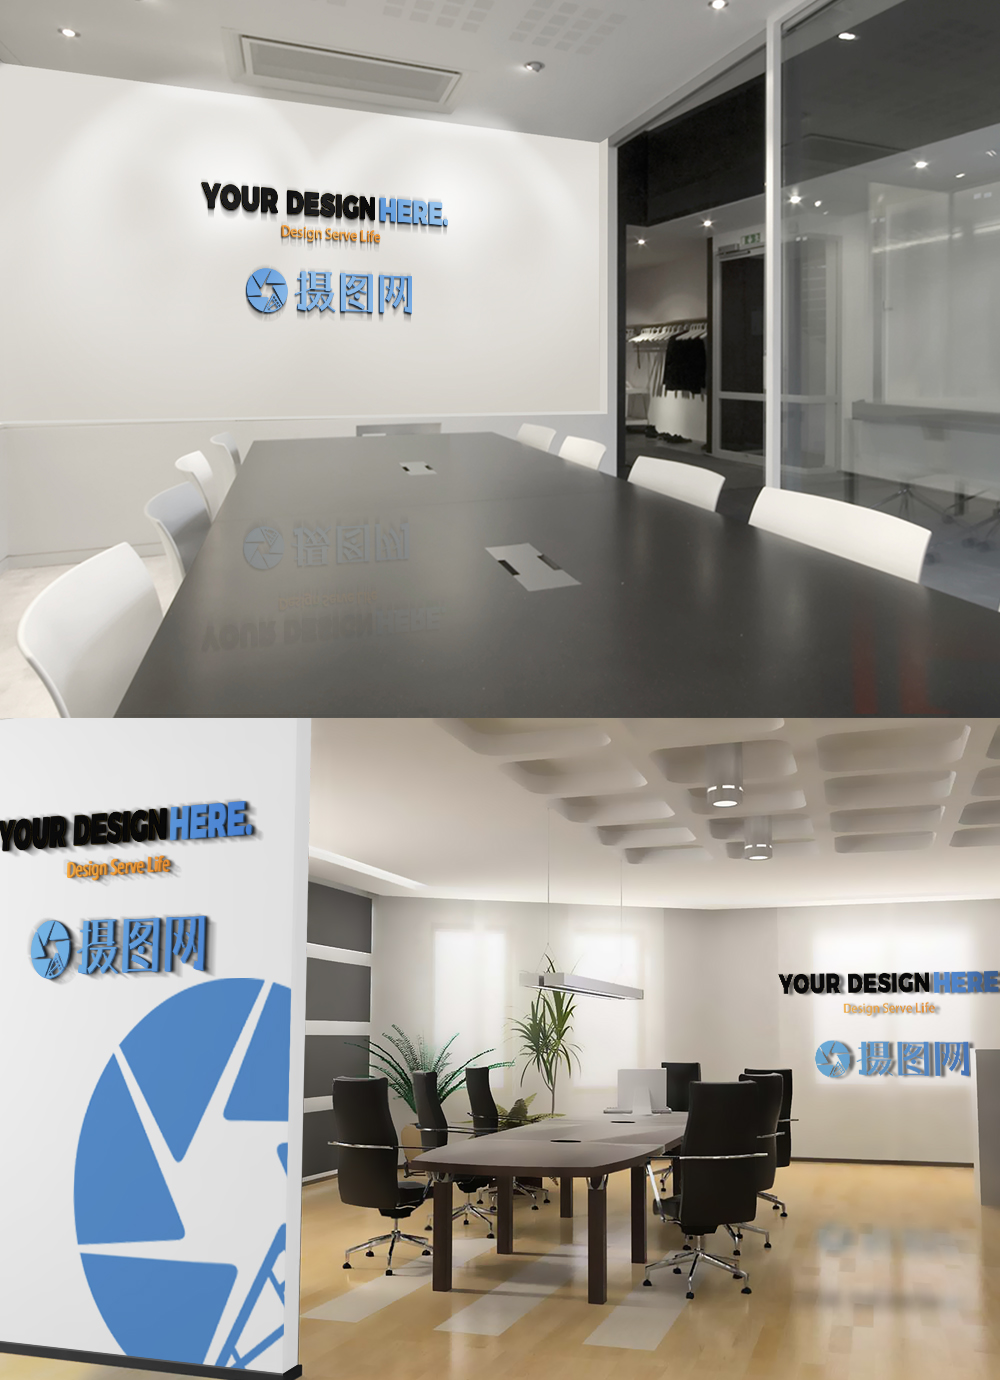 Download Mockup of corporate office image wall template image_picture free download 400575008_lovepik.com